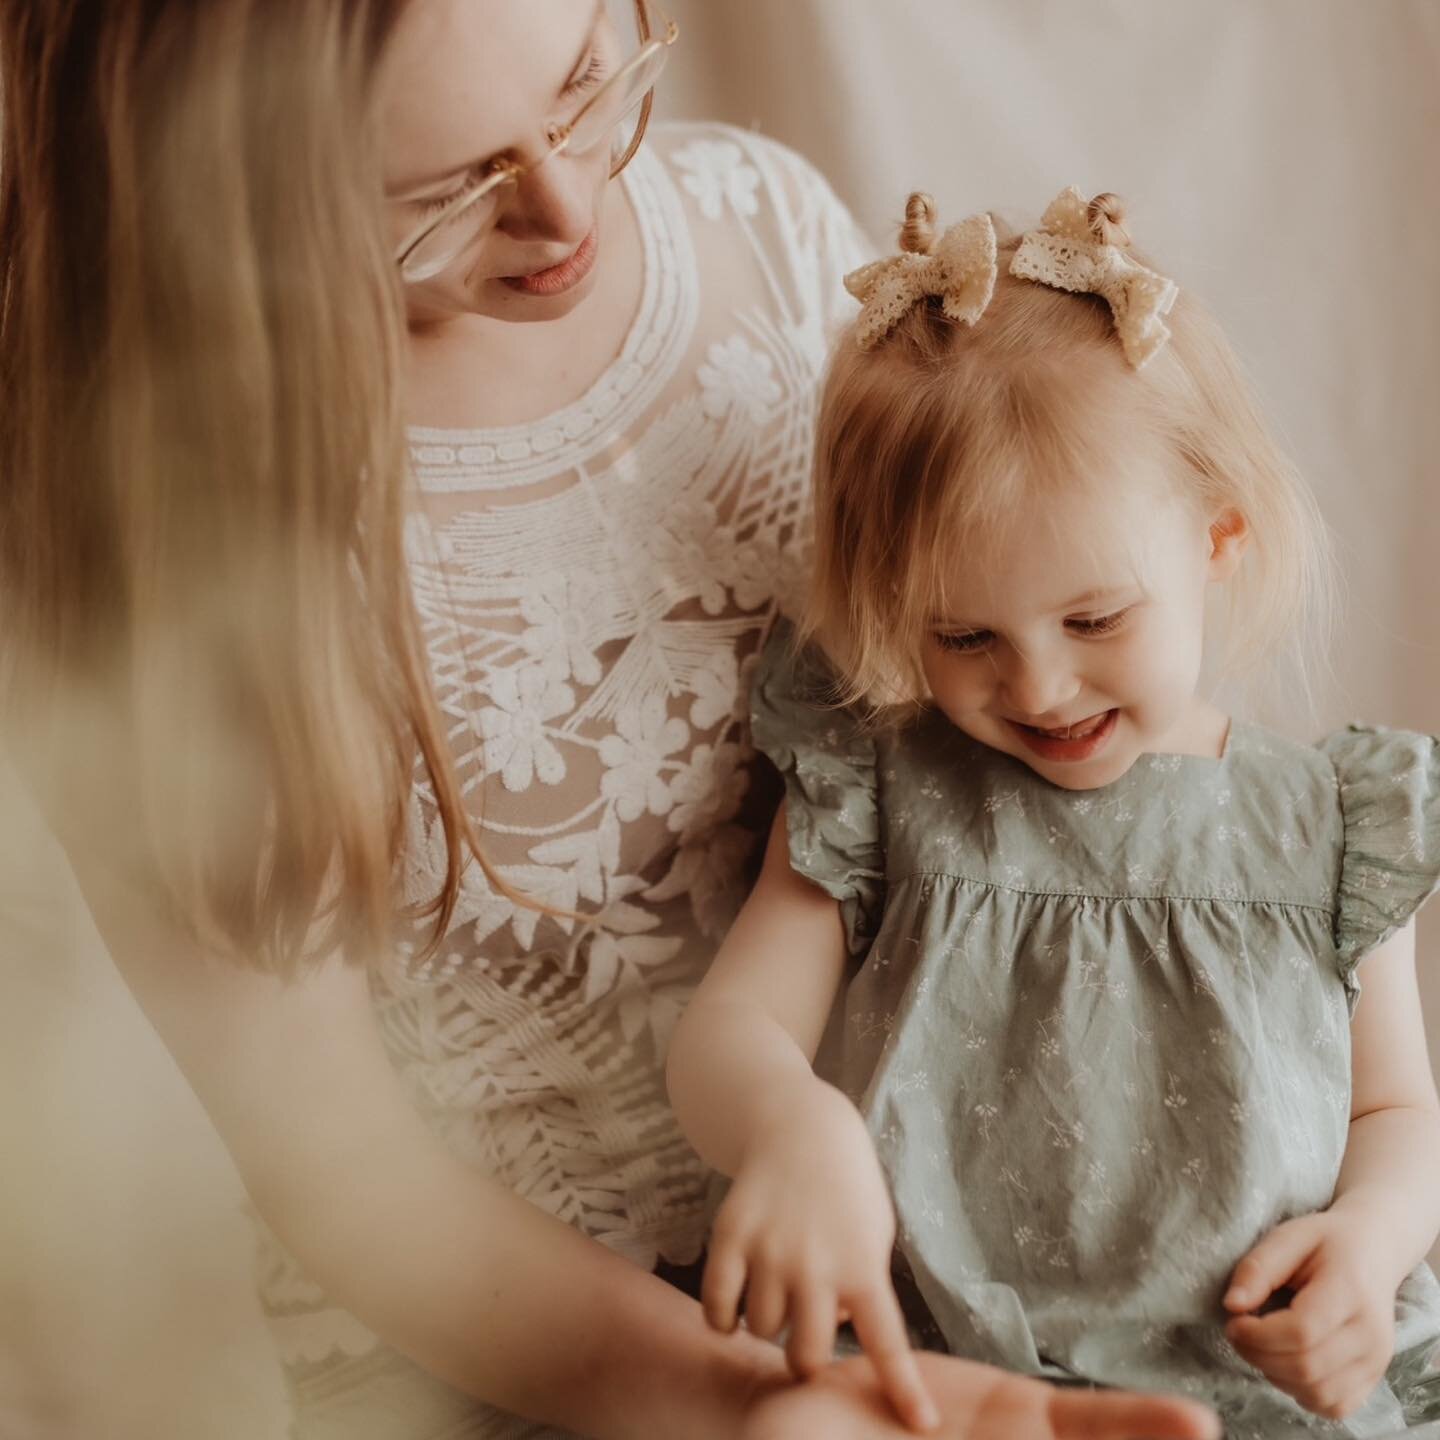 Dear moms,

I realized recently that I&rsquo;m now deemed a &ldquo;middle mom&rdquo;. My babies are no longer babies. My girls are no longer even toddlers, but kids. I no longer have to bring a backpack everywhere I go with diapers, wipes, snacks and